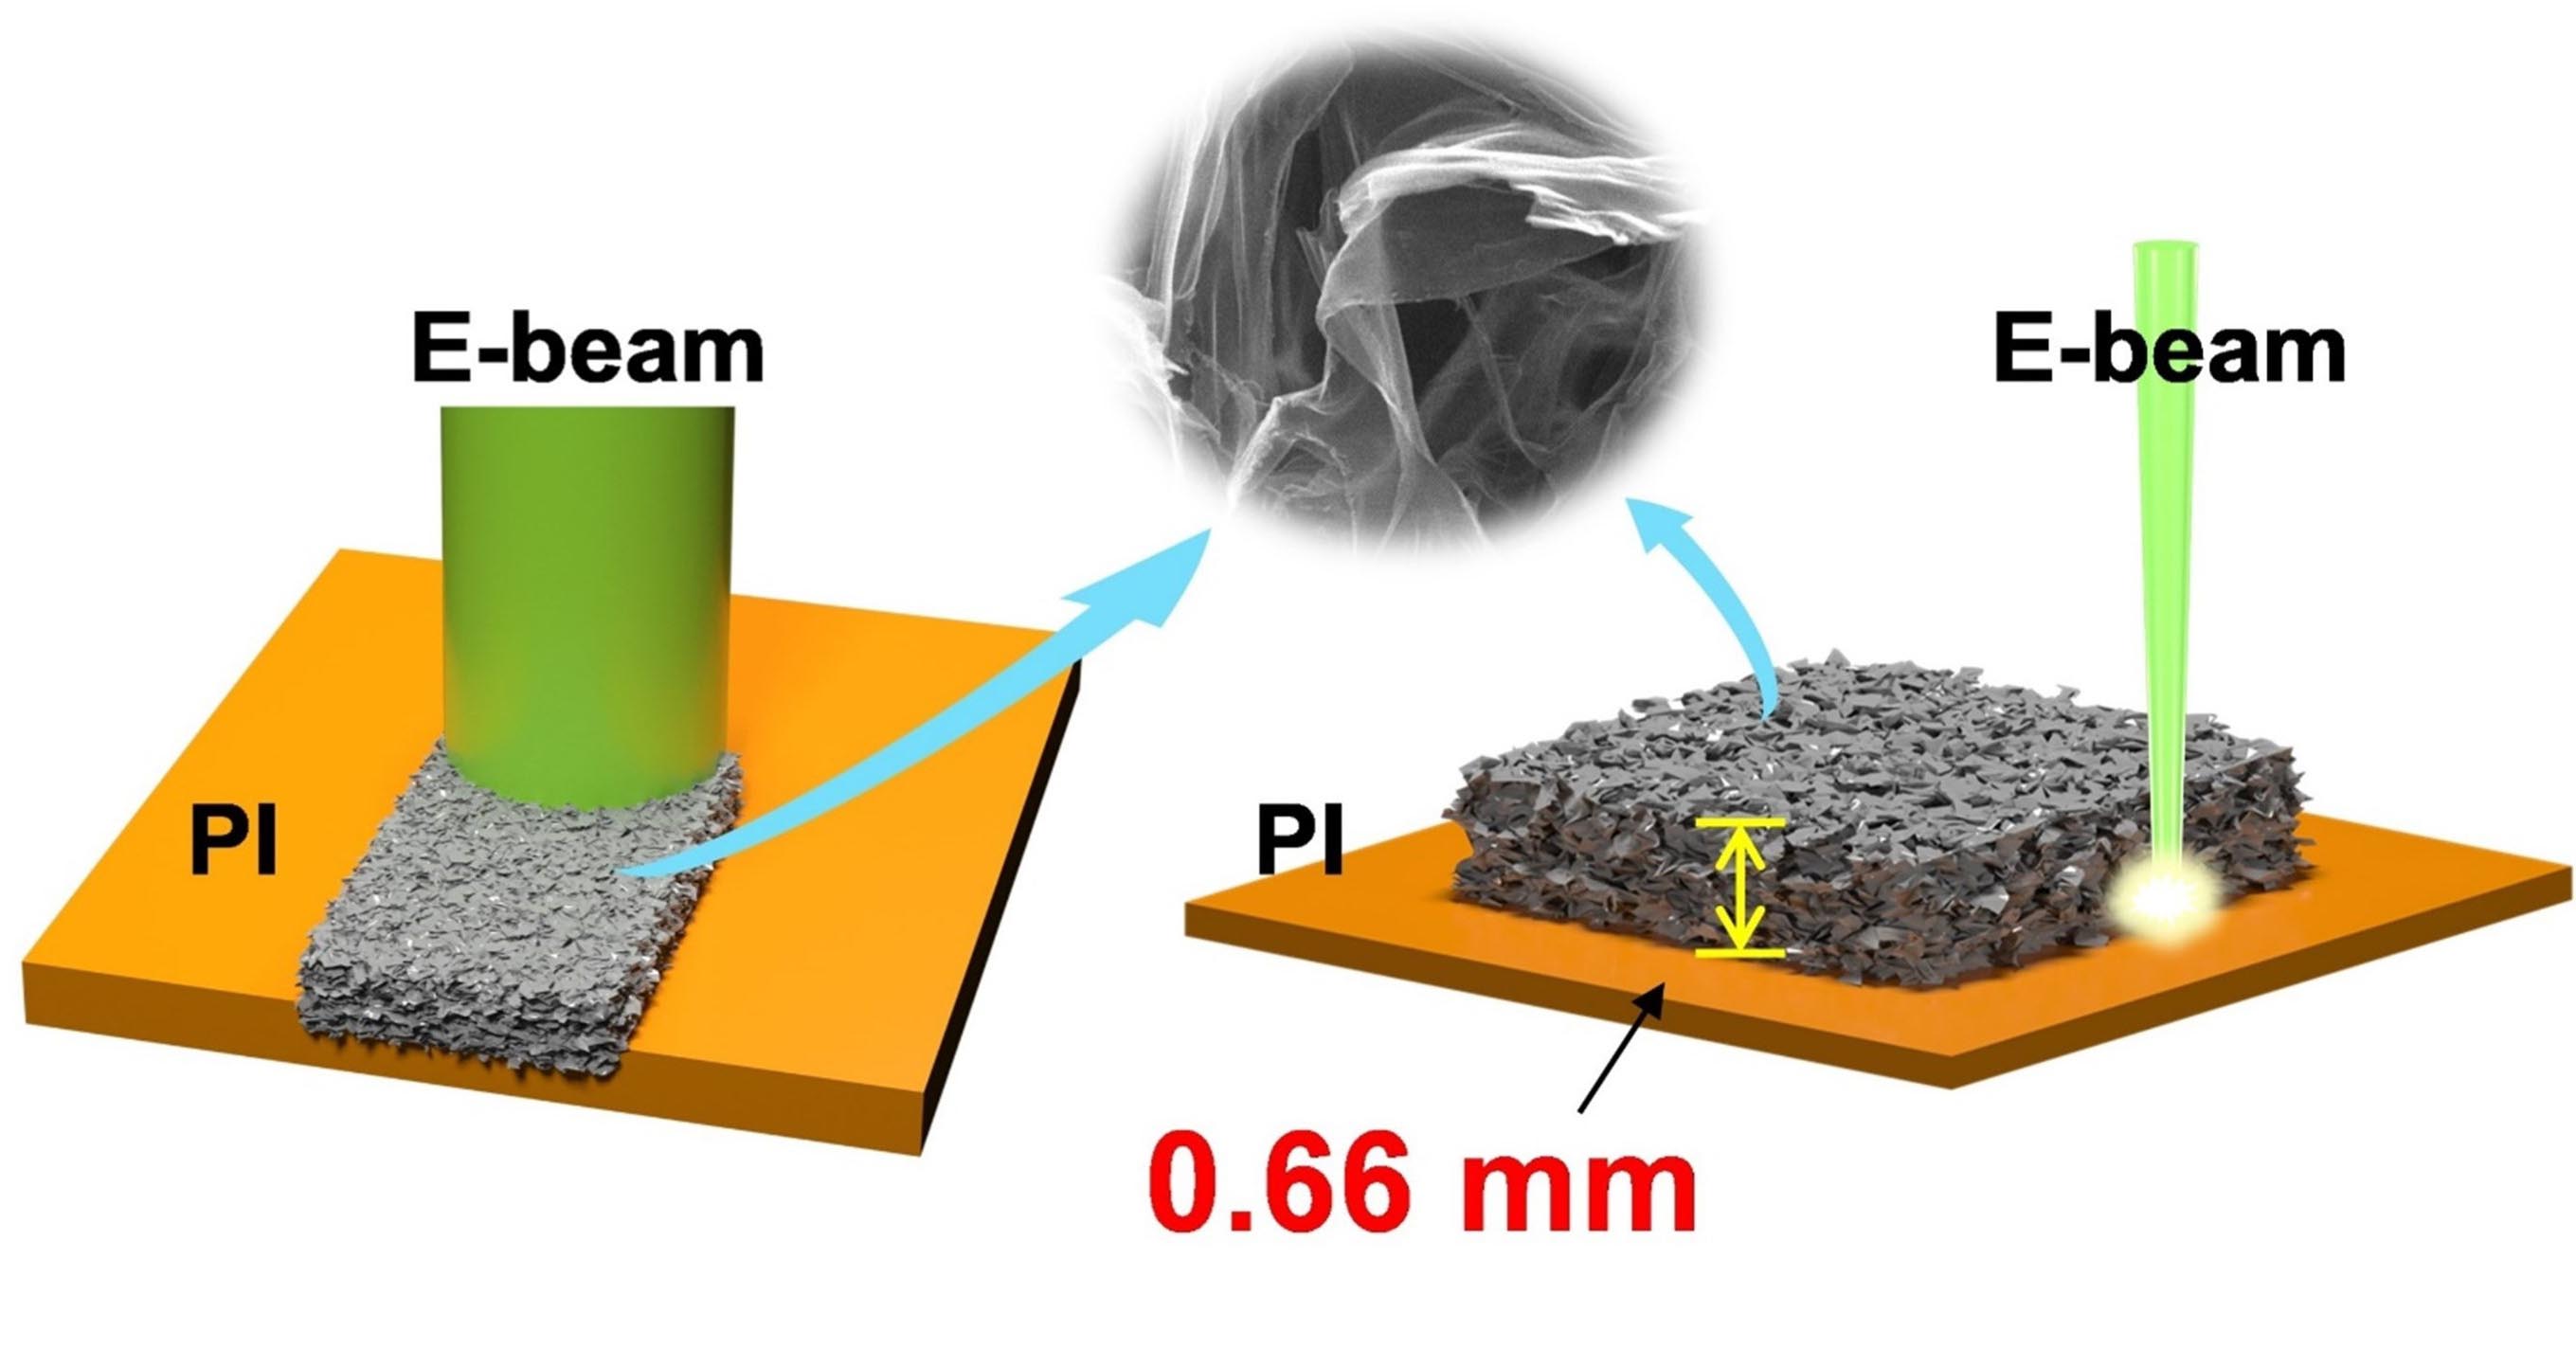 Scientists Synthesize 3D Graphene Films with High-energy E-beam